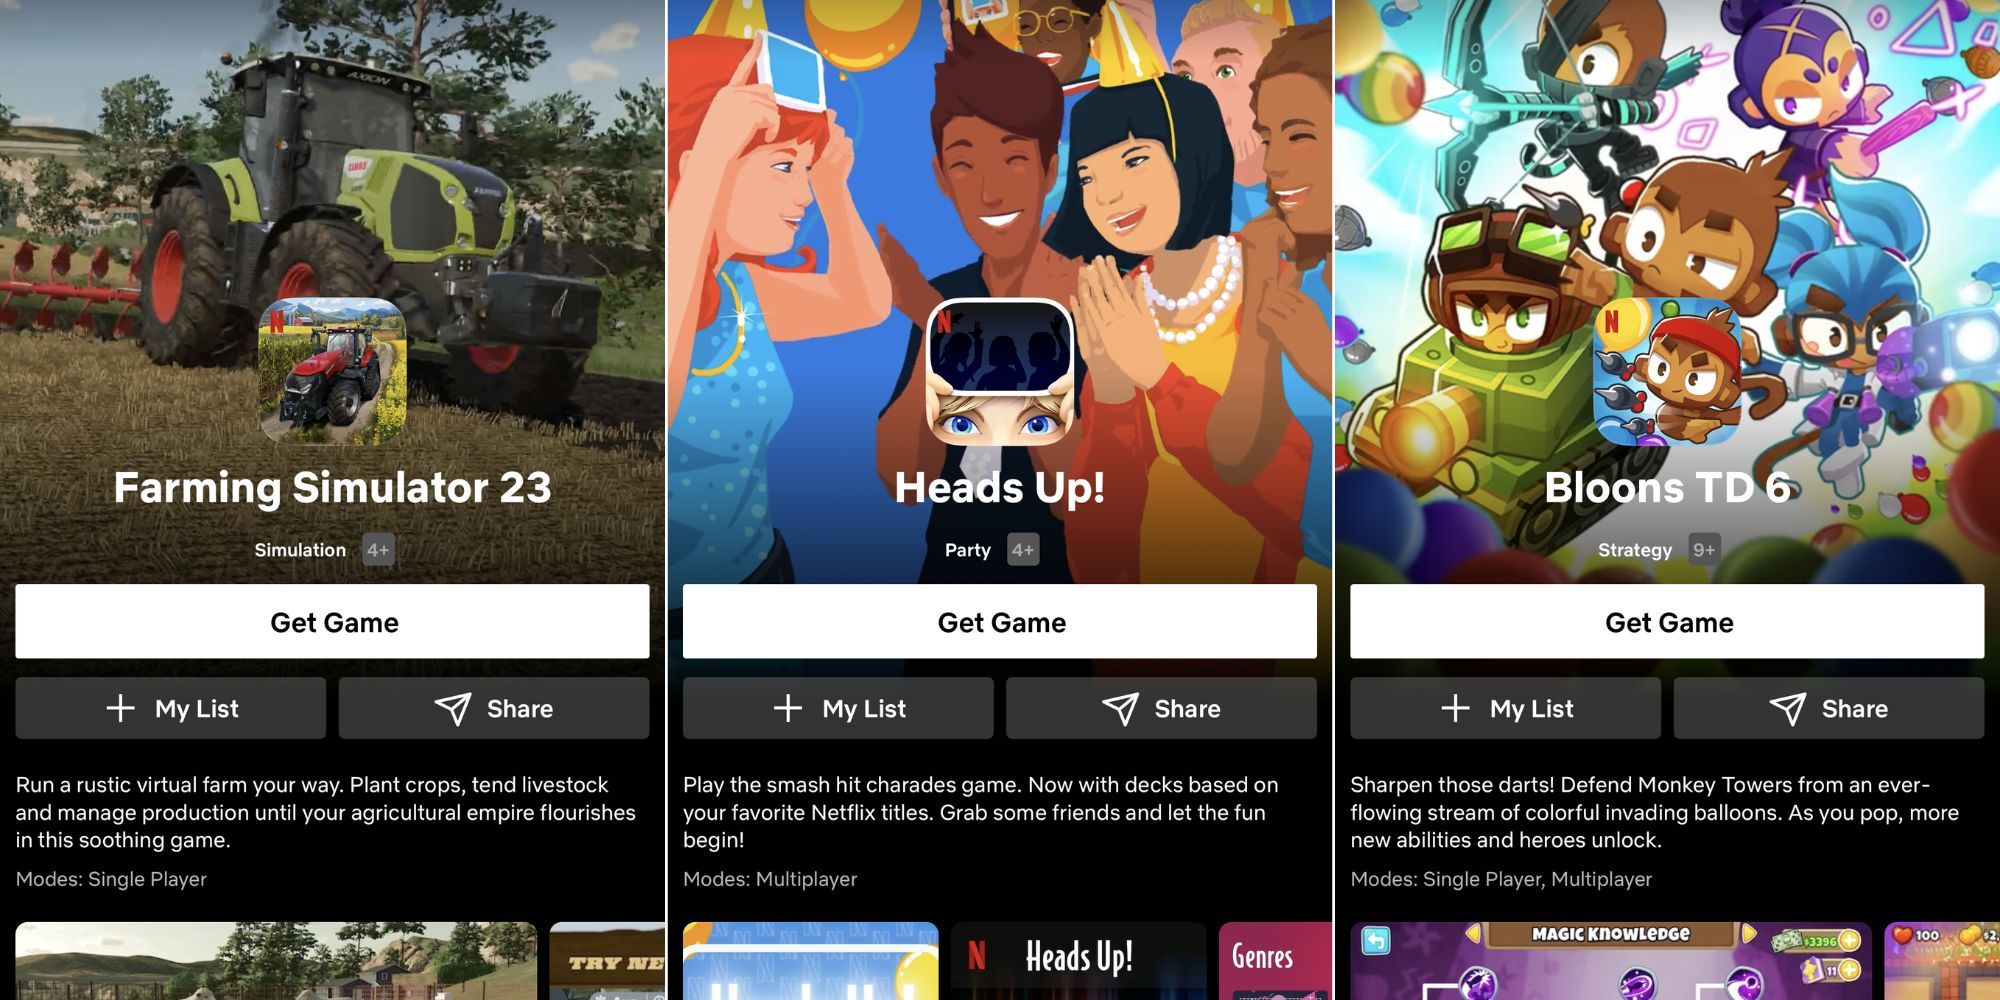 Netflix Mobile Games split image featuring Farming Similar 23, Heads Up!, and Bloons TD 6